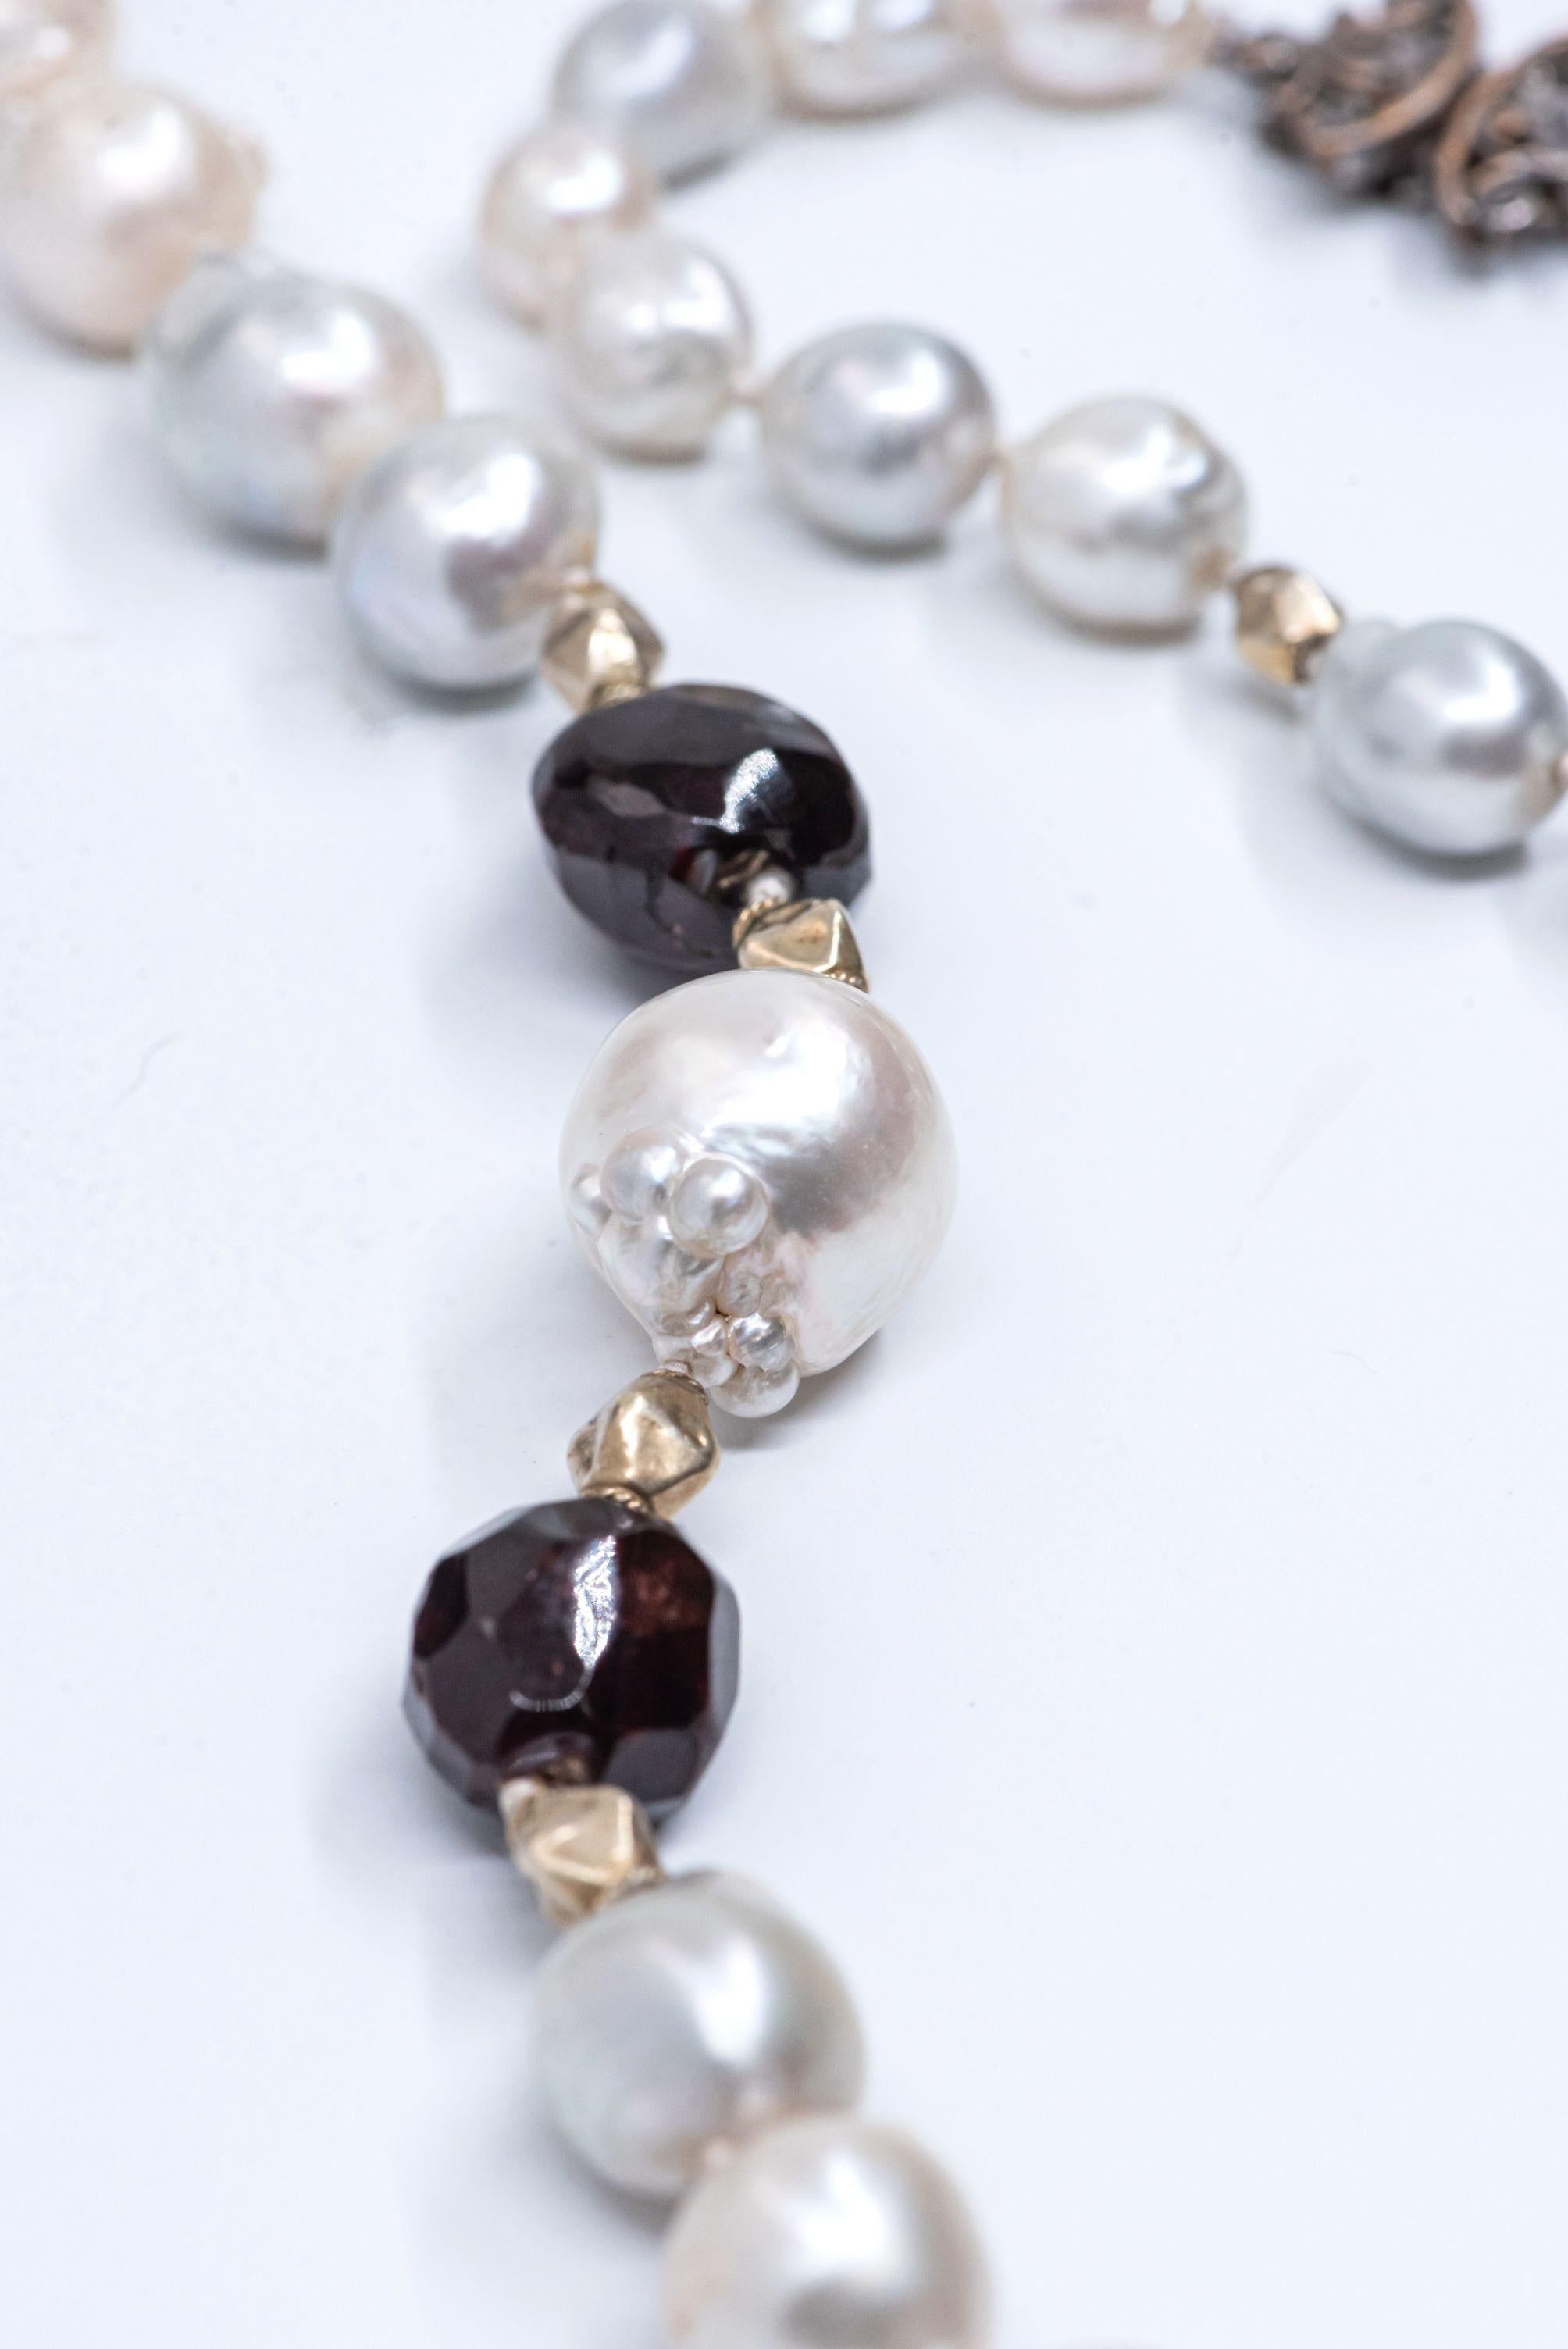 Faceted Garnet Intan Diamonds Baroque South Sea Pearl Vintage Chain Necklace For Sale 4